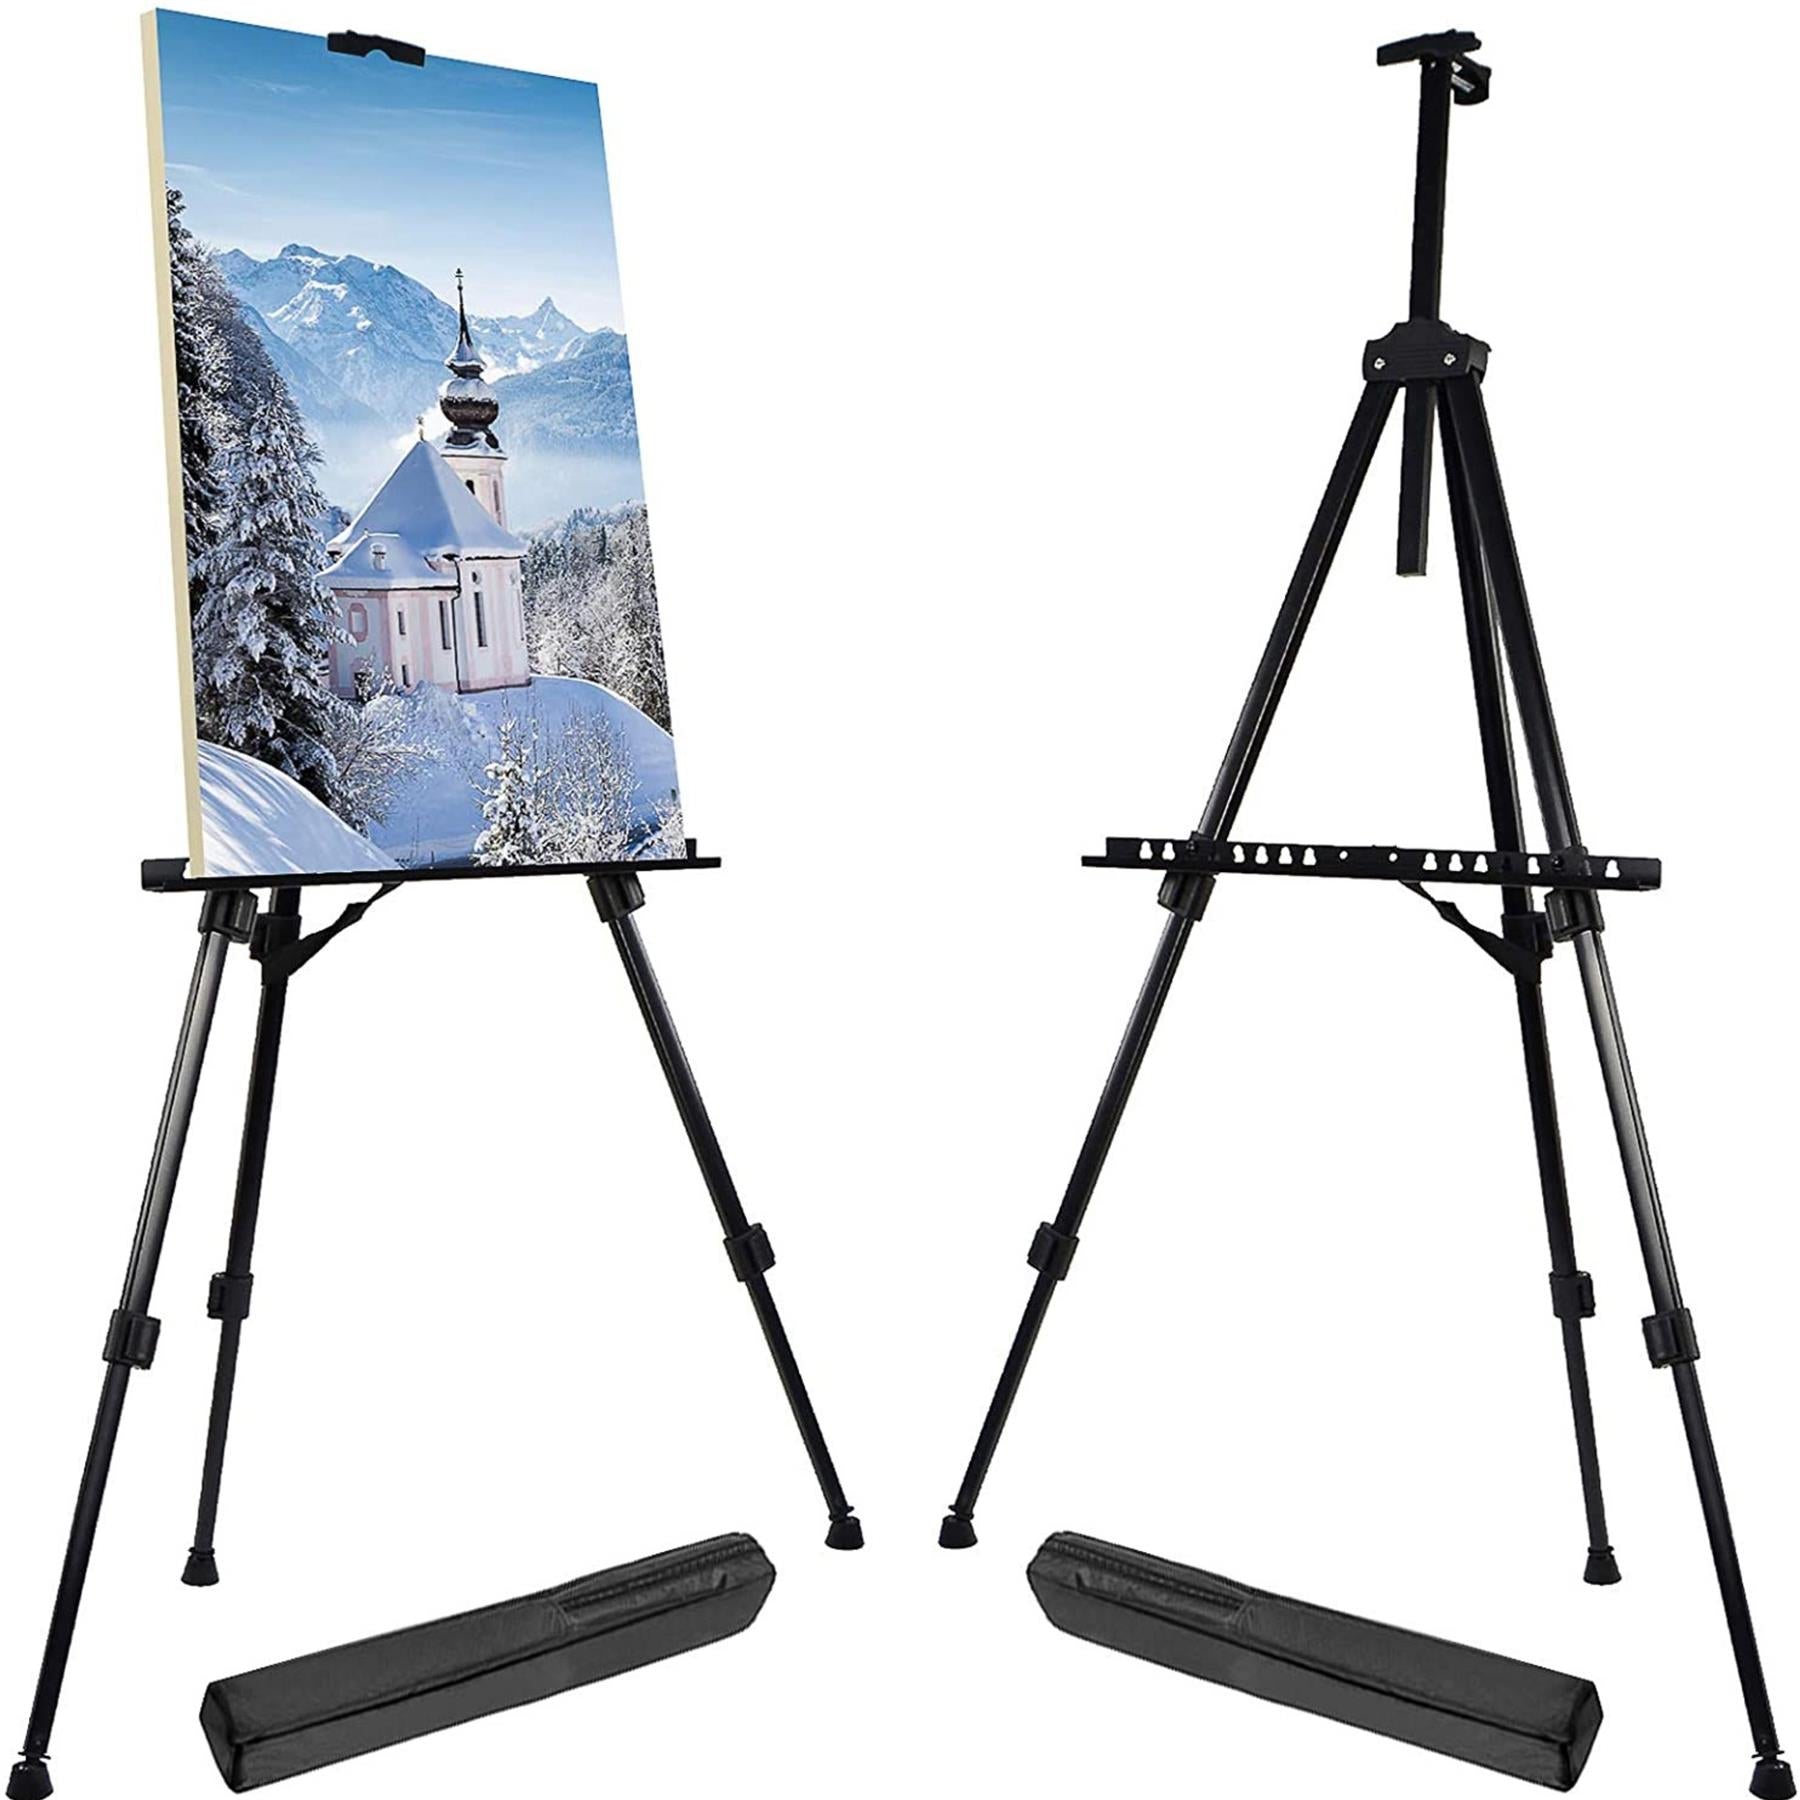 Foldable Easel Painting Display Stand by Geezy - UKBuyZone